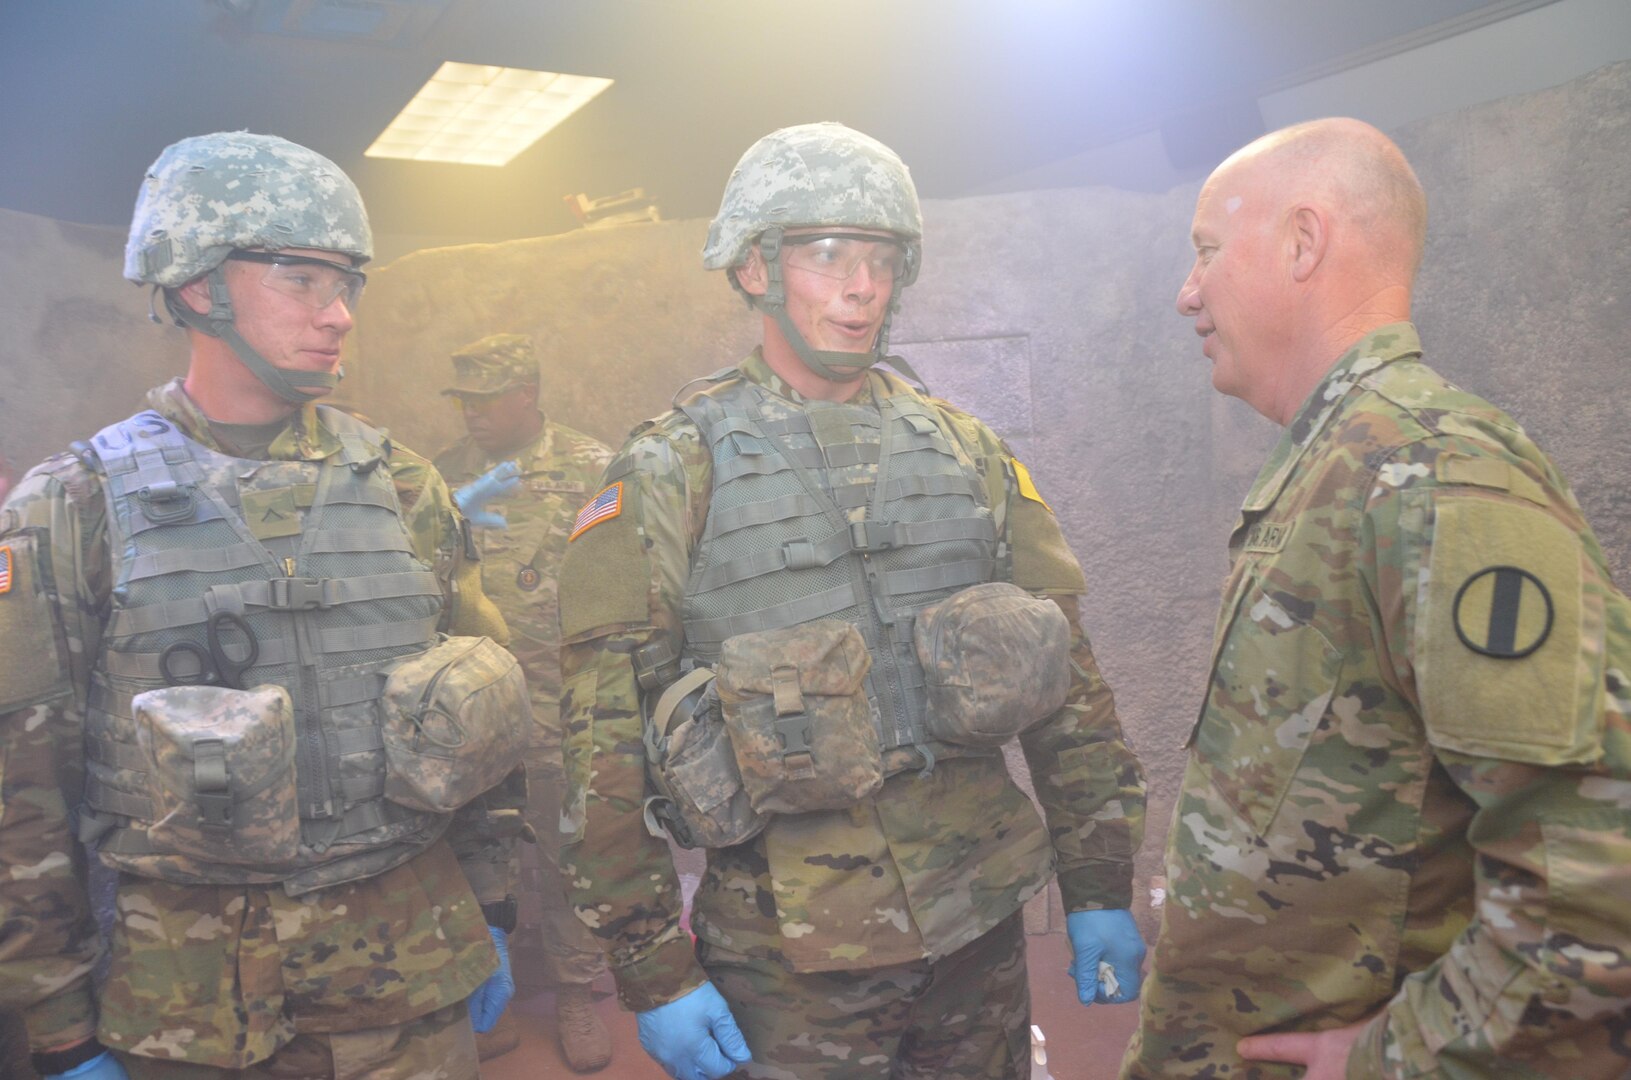 Maj. Gen. Glen Moore (right), deputy commanding general, Army National Guard, U.S. Army Training and Doctrine Command, speaks with Army students in the combat medic training program at the Medical Education and Training Campus at Joint Base San Antonio-Fort Sam Houston April 14. Moore observed the students as they trained in the Combat Trauma Patient Simulator, a simulation lab that provides a realistic type of training experience for students learning how to treat trauma wounds on casualties in a combat environment. About half of the students in the combat medic training program are in the National Guard or Army Reserve.